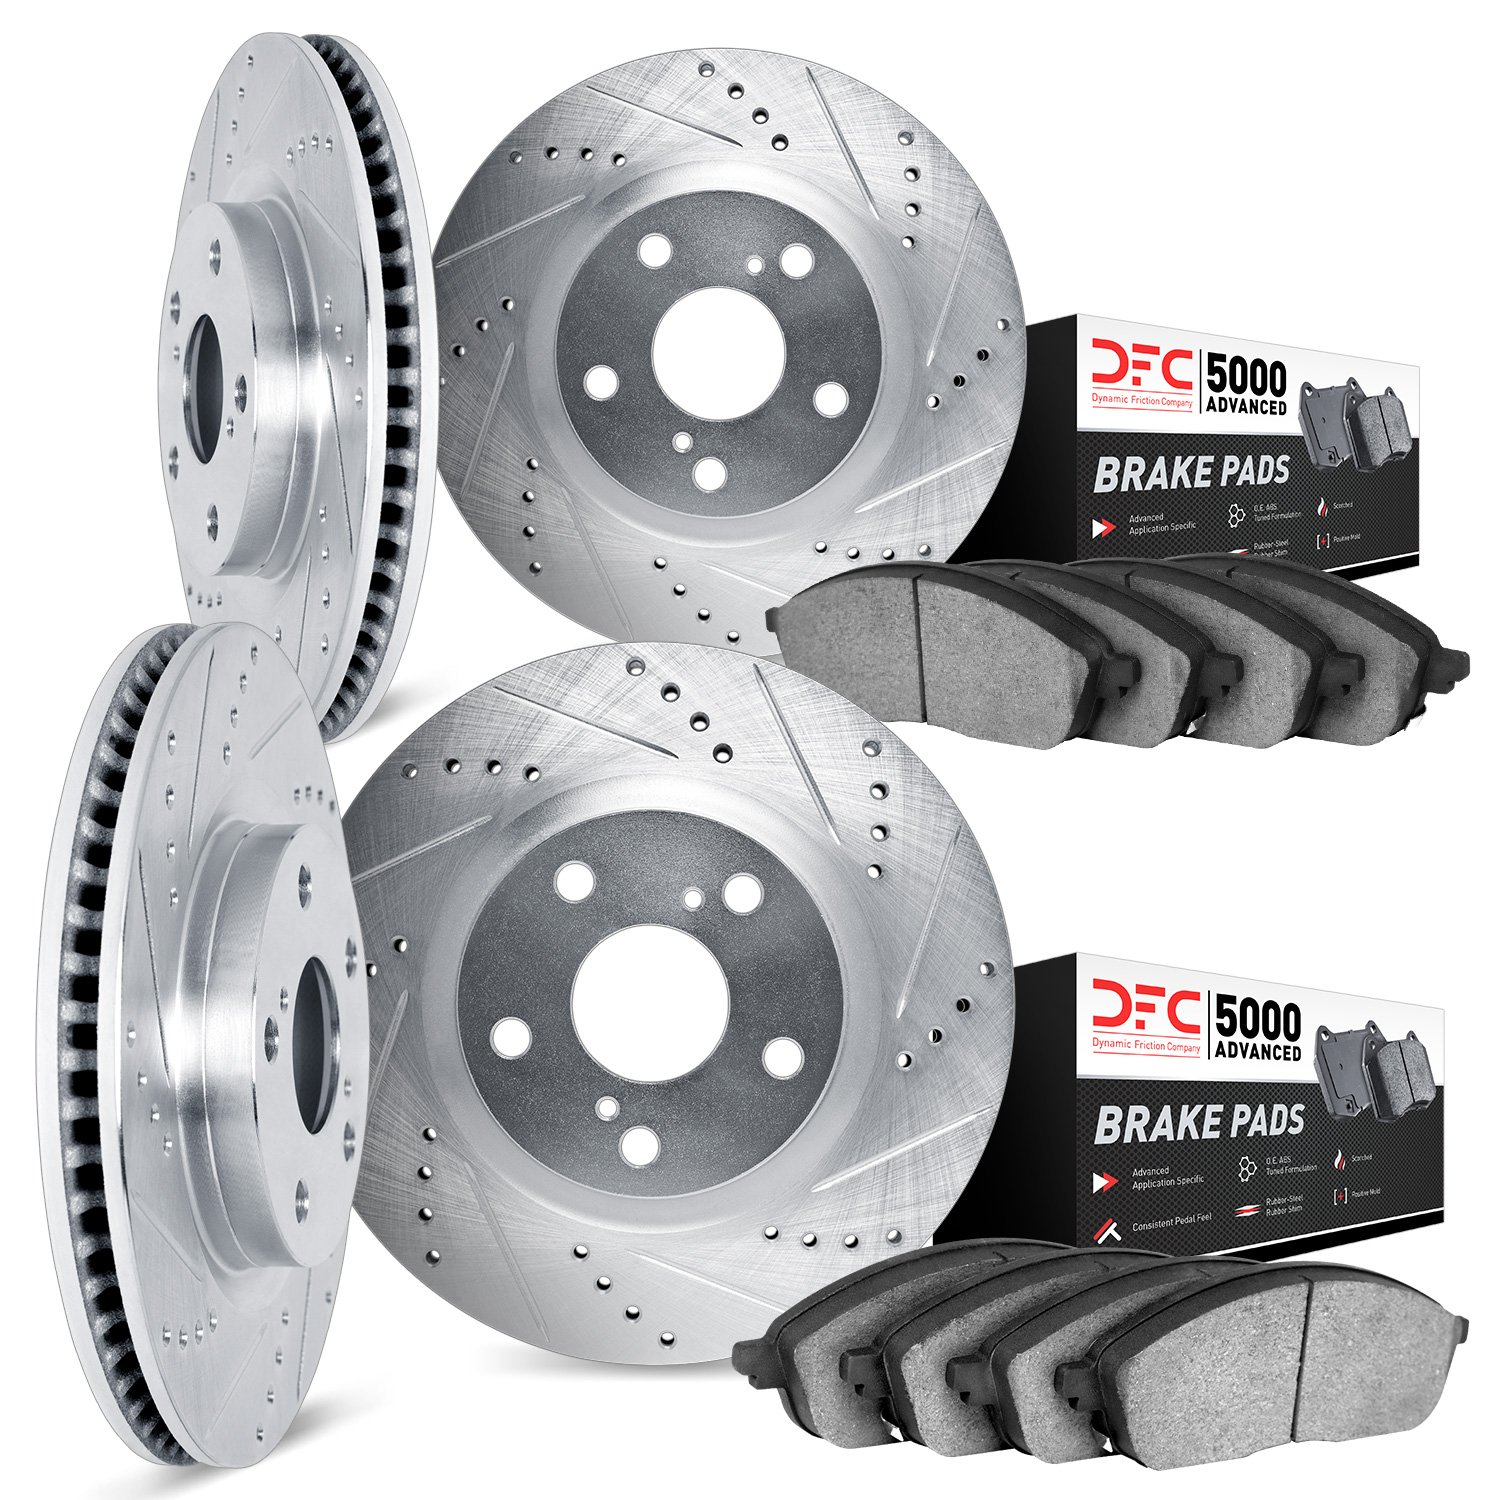 7504-31019 Drilled/Slotted Brake Rotors w/5000 Advanced Brake Pads Kit [Silver], 2006-2007 BMW, Position: Front and Rear